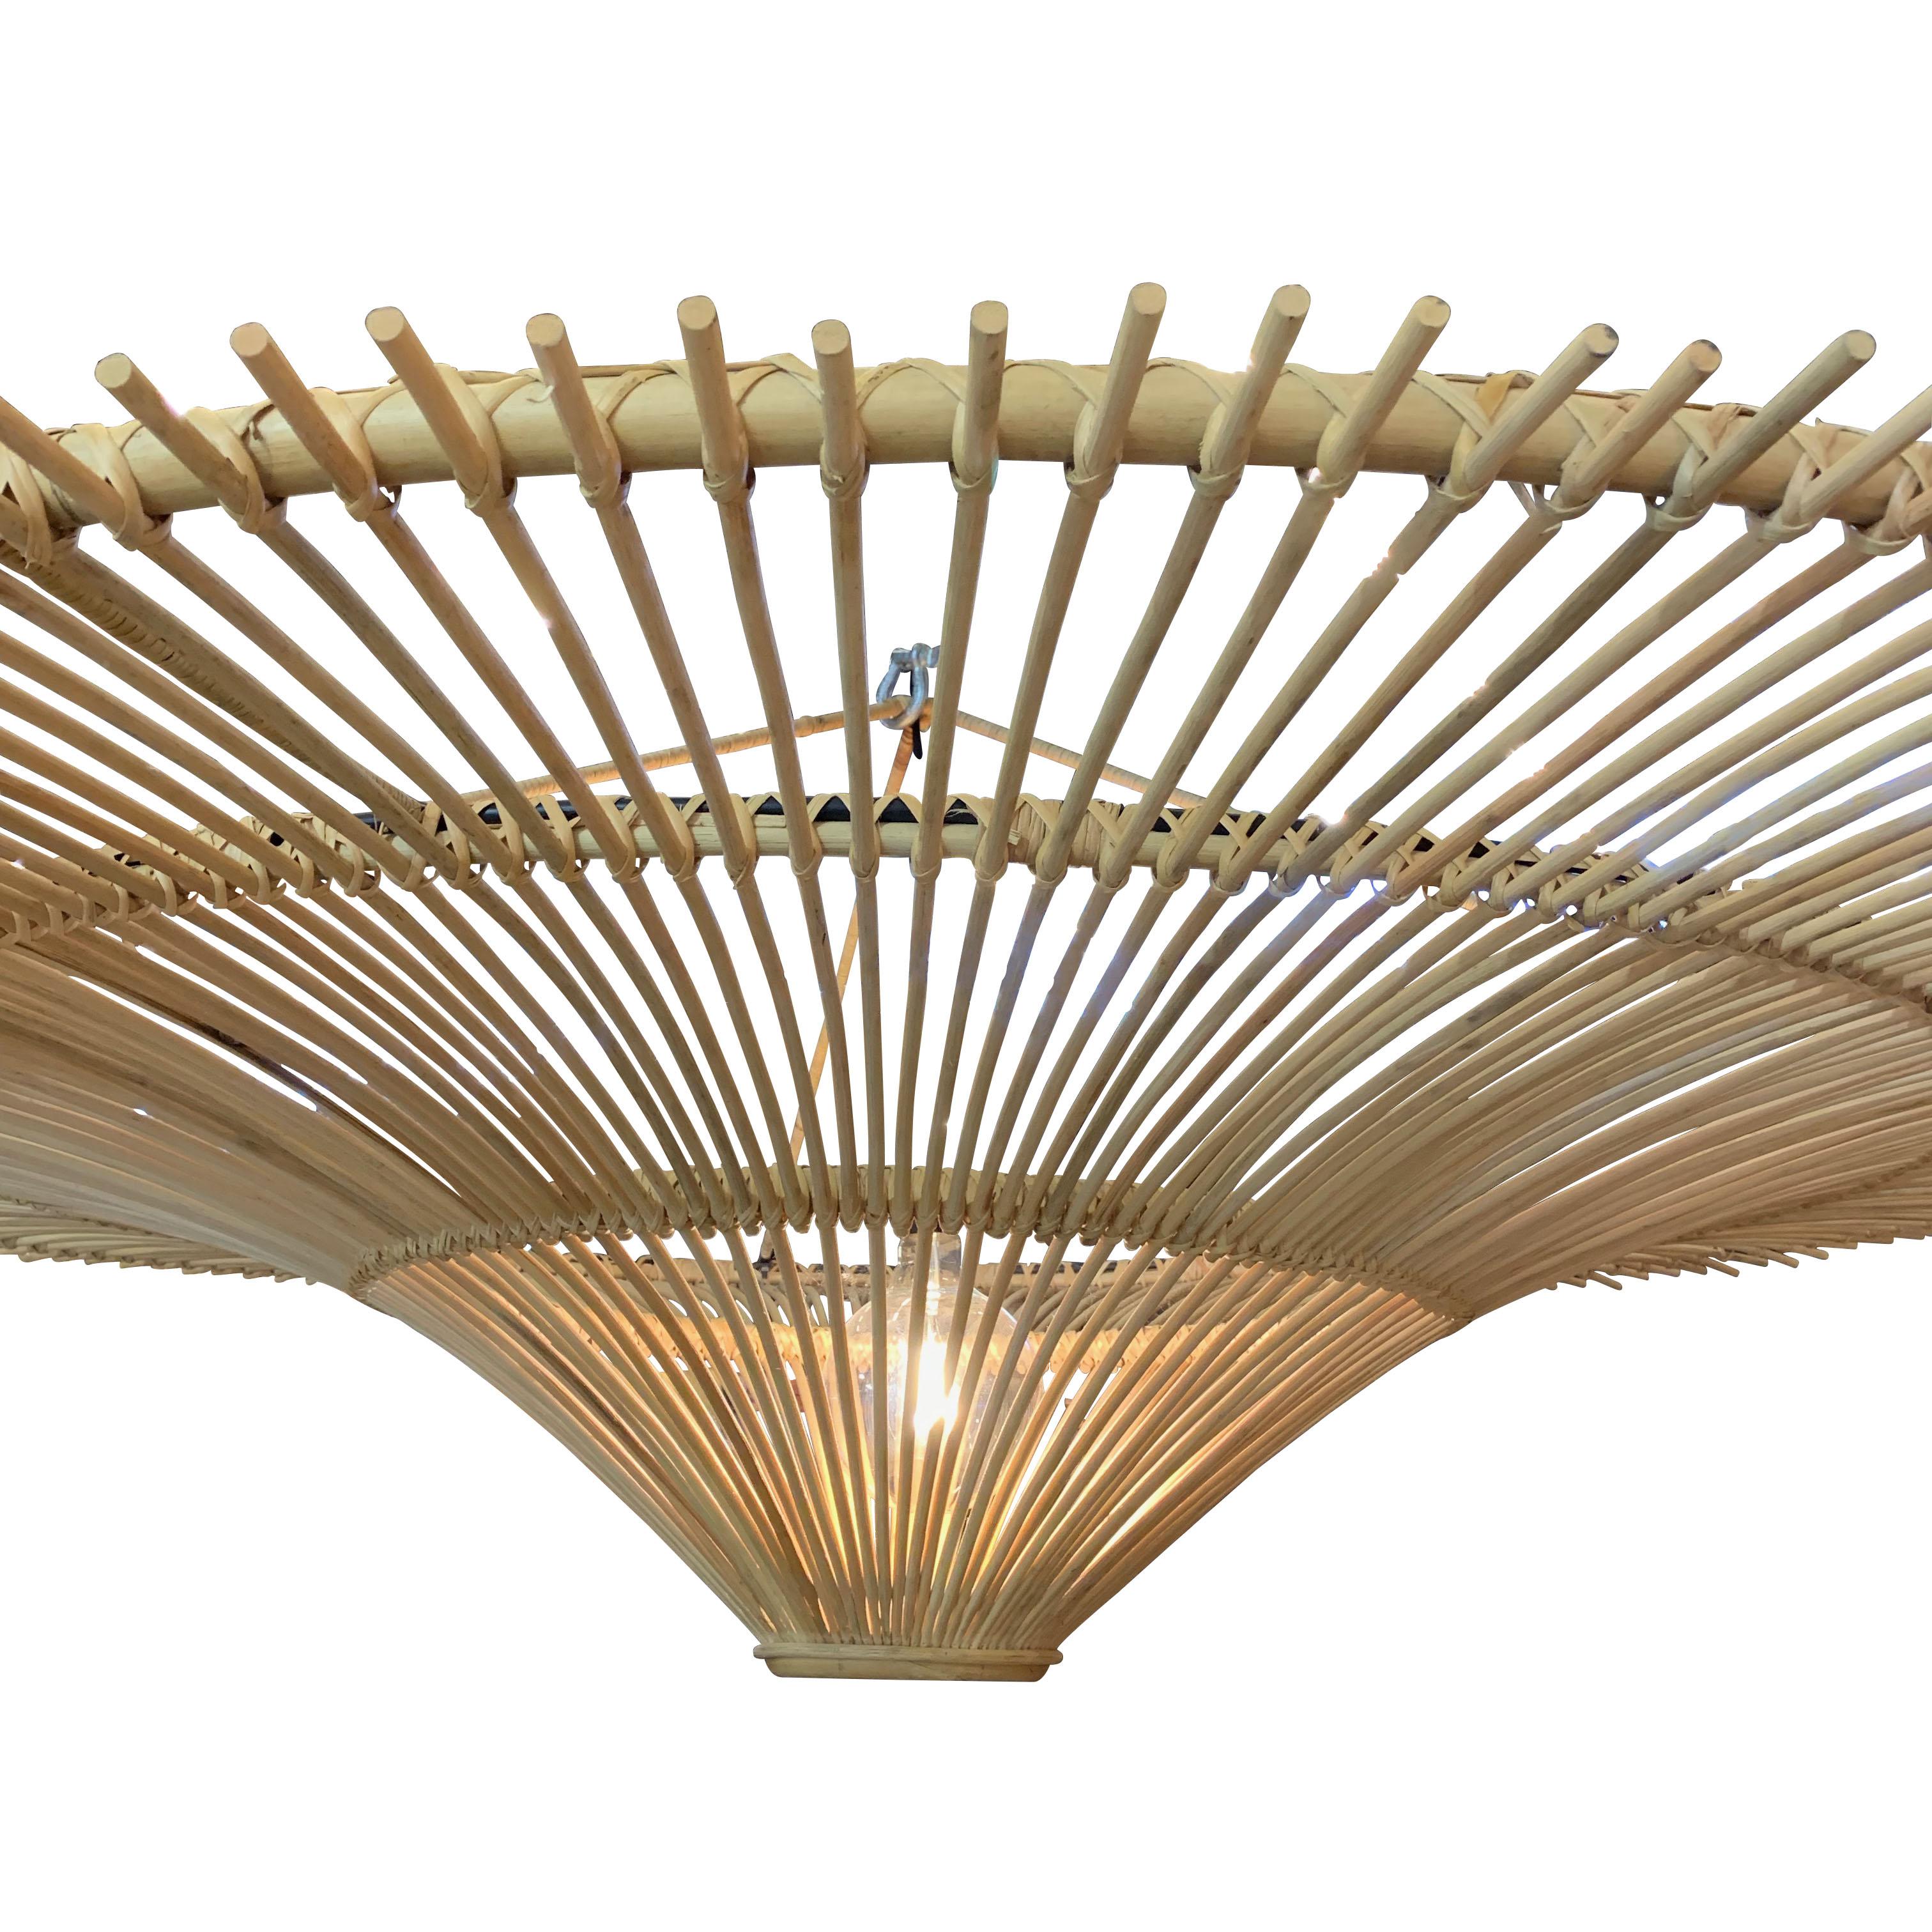 Contemporary Indonesian large round umbrella shaped chandelier made of bamboo
Single bulb
60watt to 300 watt maximum
L976 ARRIVAL TBD
Also available in two additional sizes
L976A.  20.5